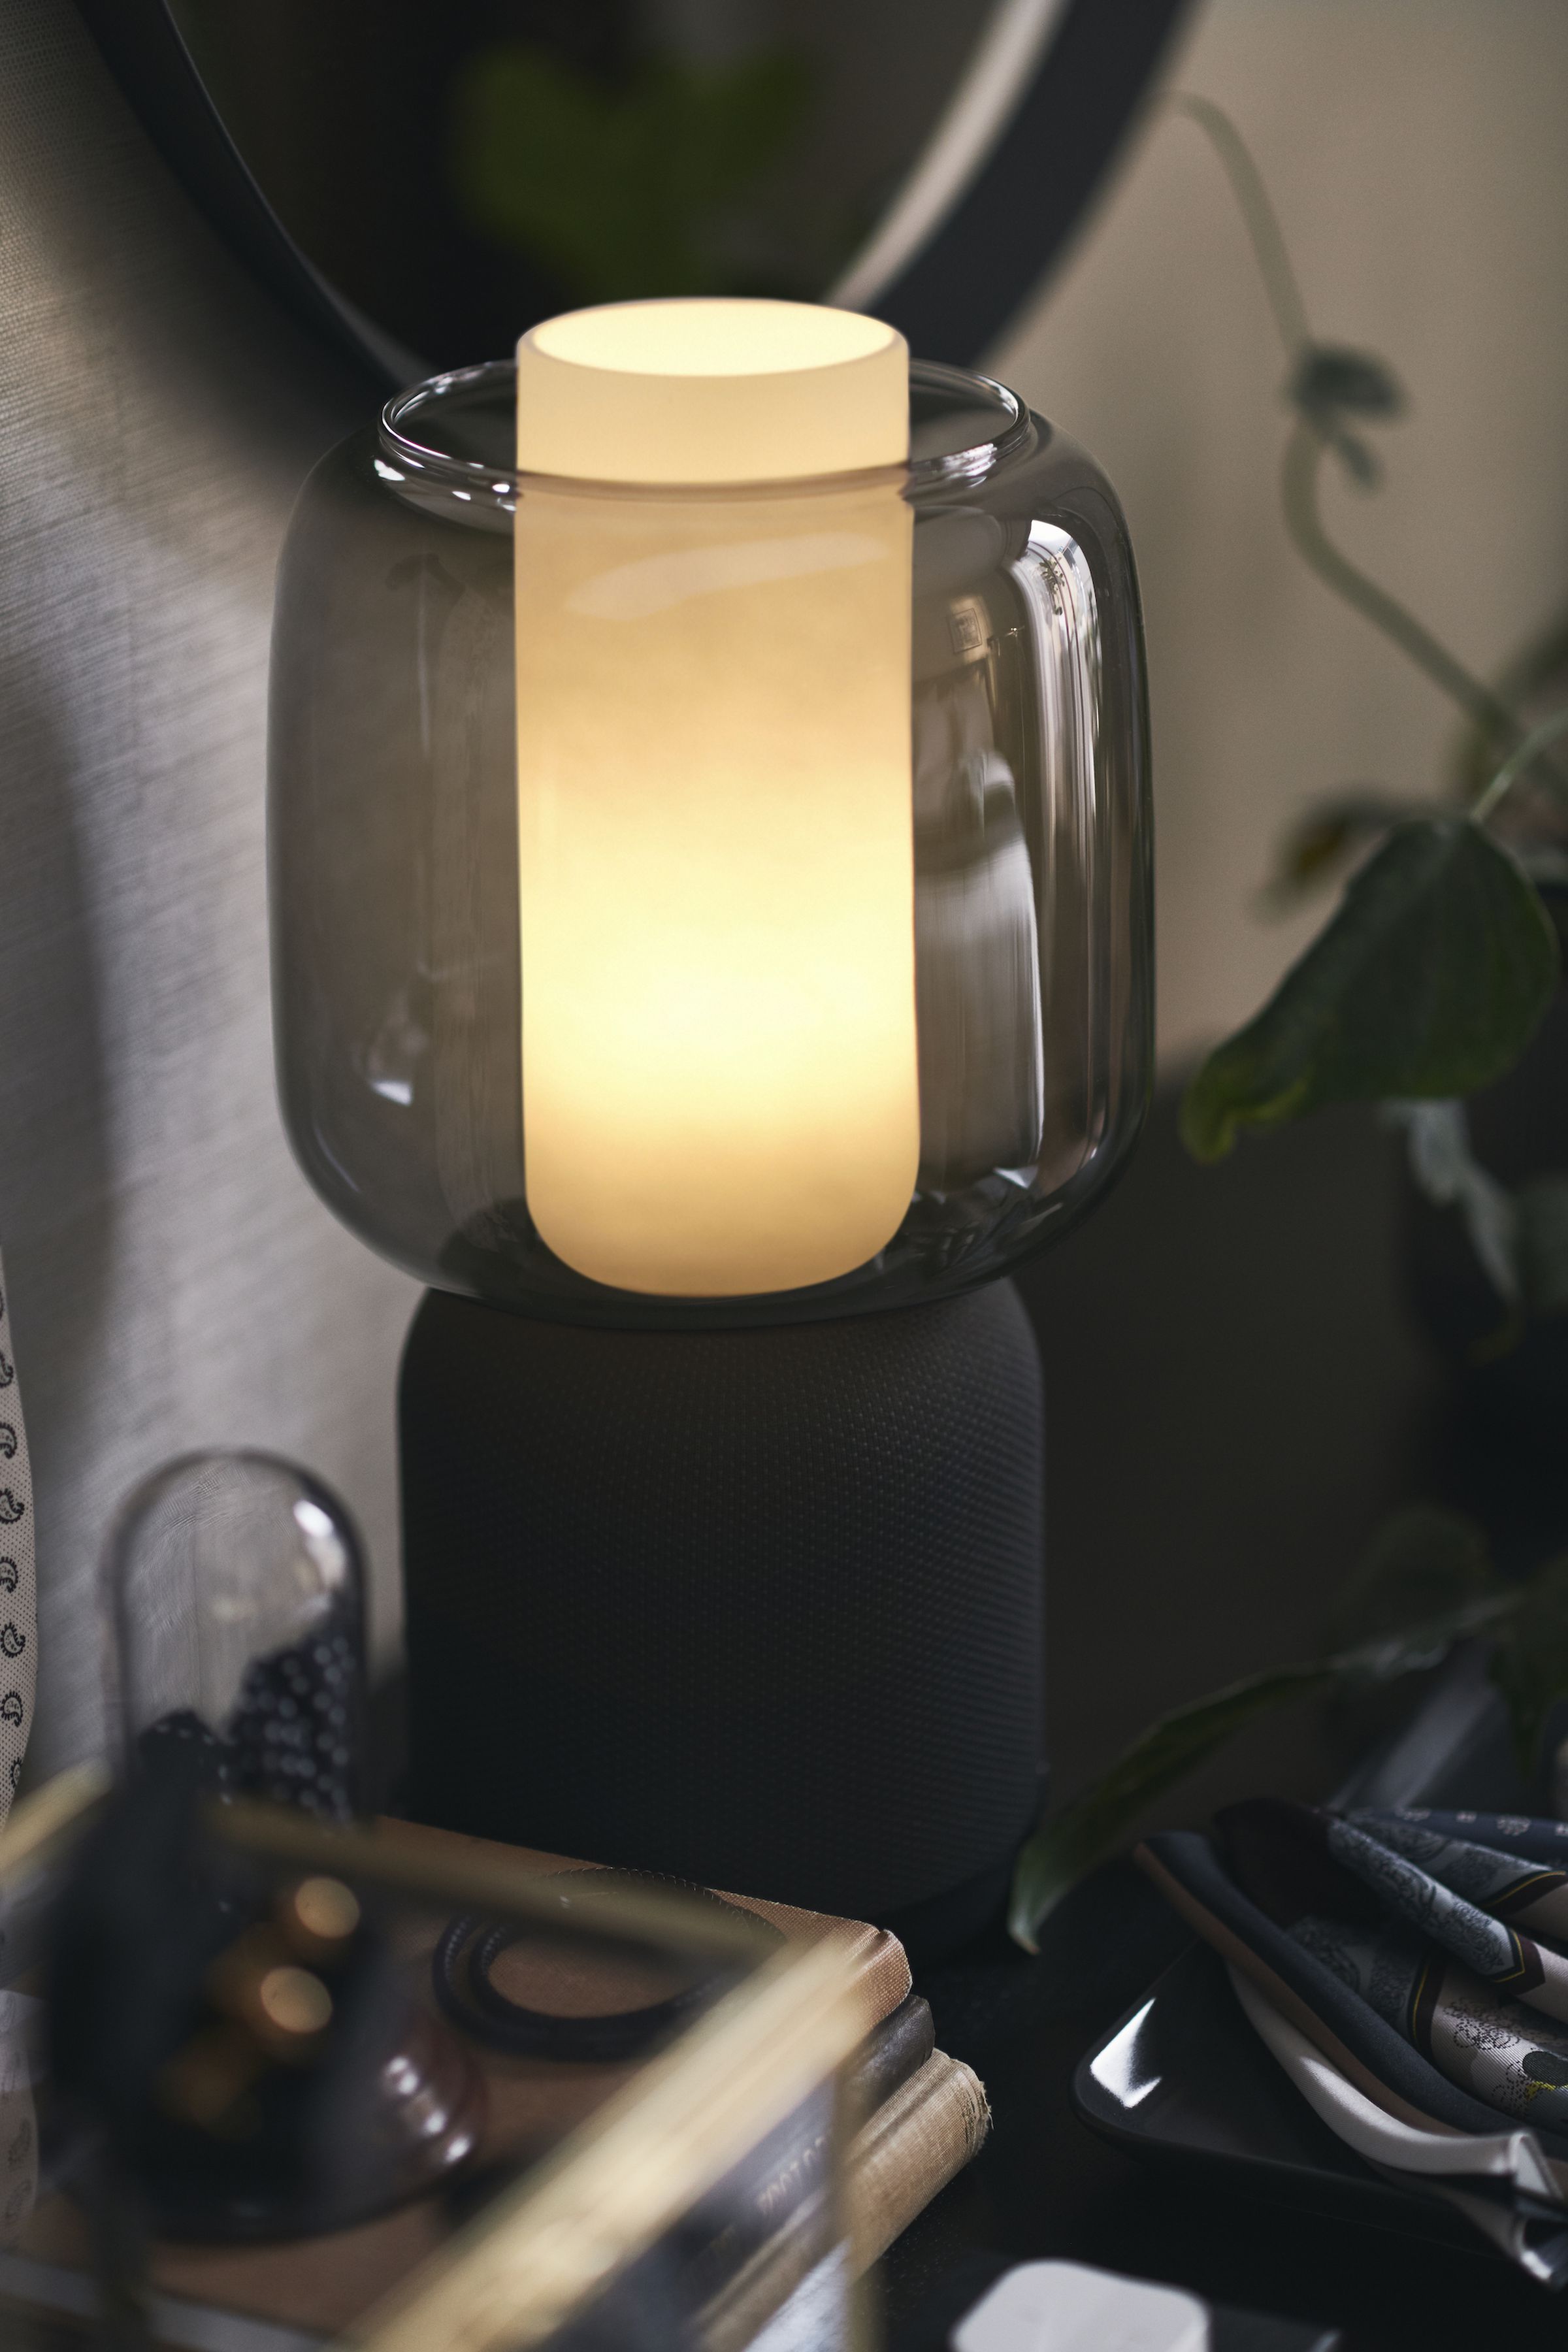 There’s now a translucent black glass lampshade in addition to the opaque white style.